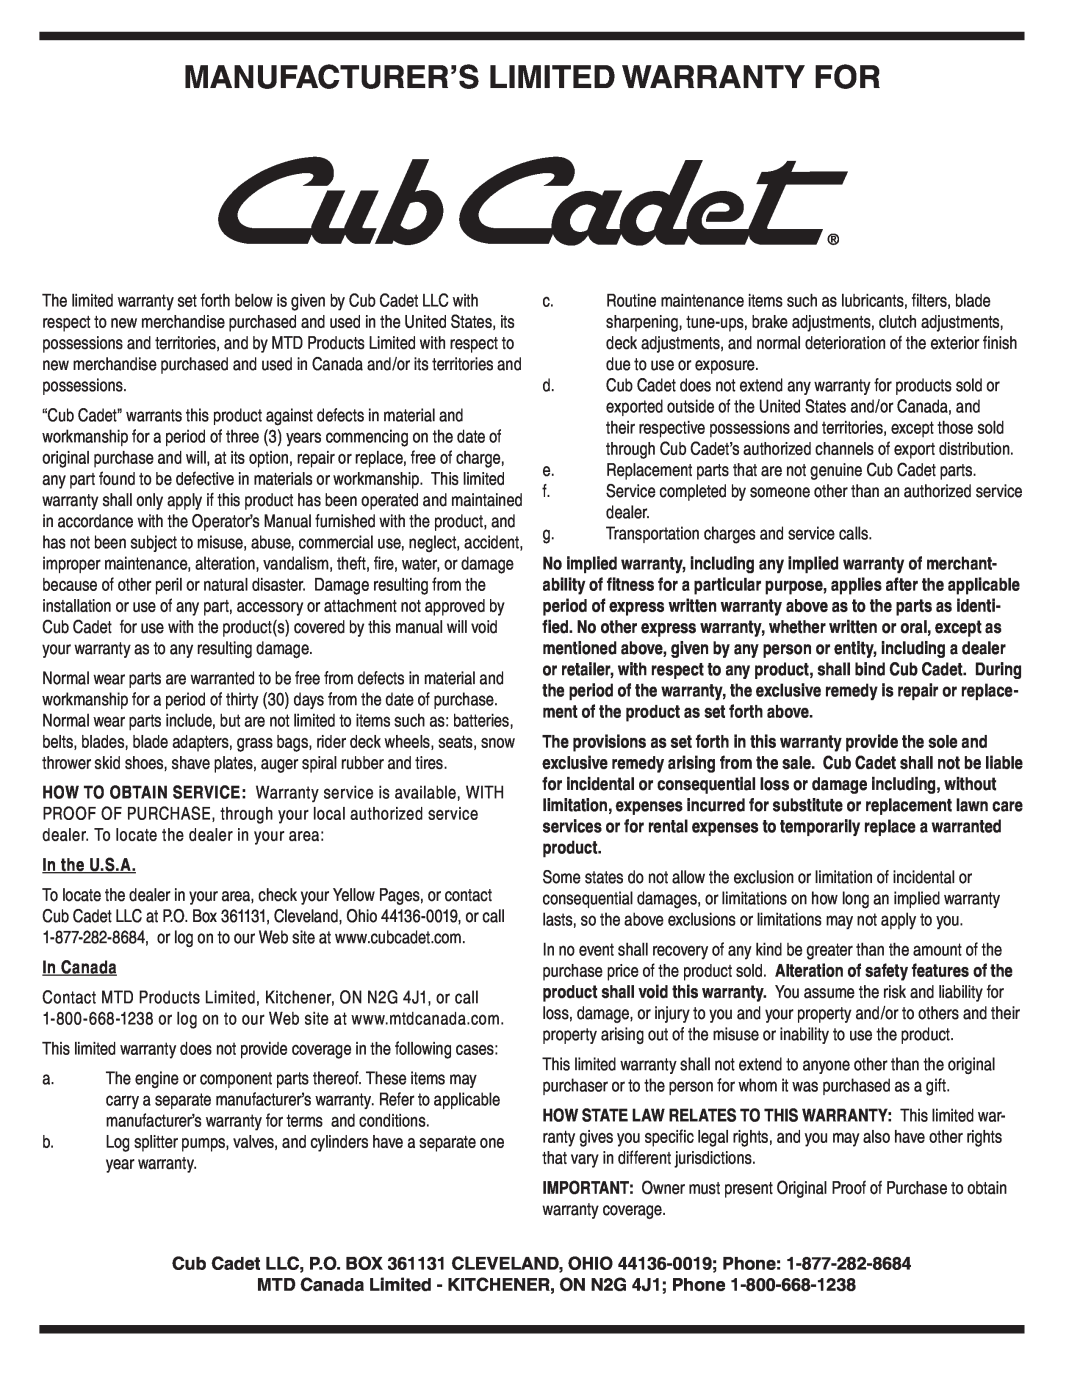 Cub Cadet 930 SWE, 933 SWE warranty Manufacturer’S Limited Warranty For, In the U.S.A, In Canada 